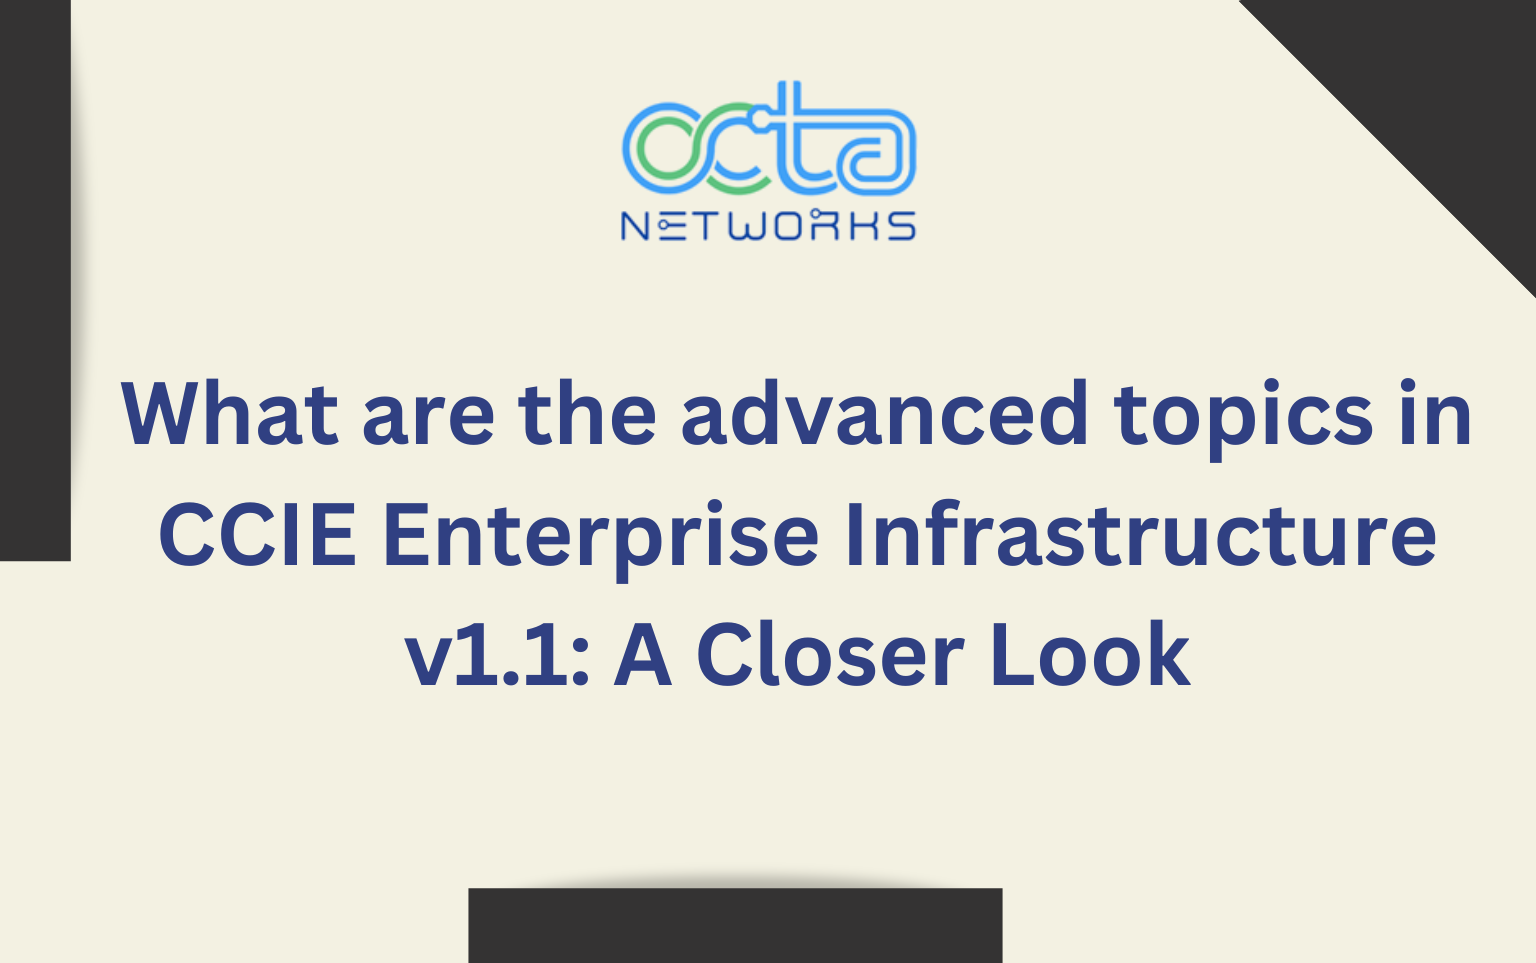 You are currently viewing What are the advanced topics in CCIE Enterprise Infrastructure v1.1: A Closer Look